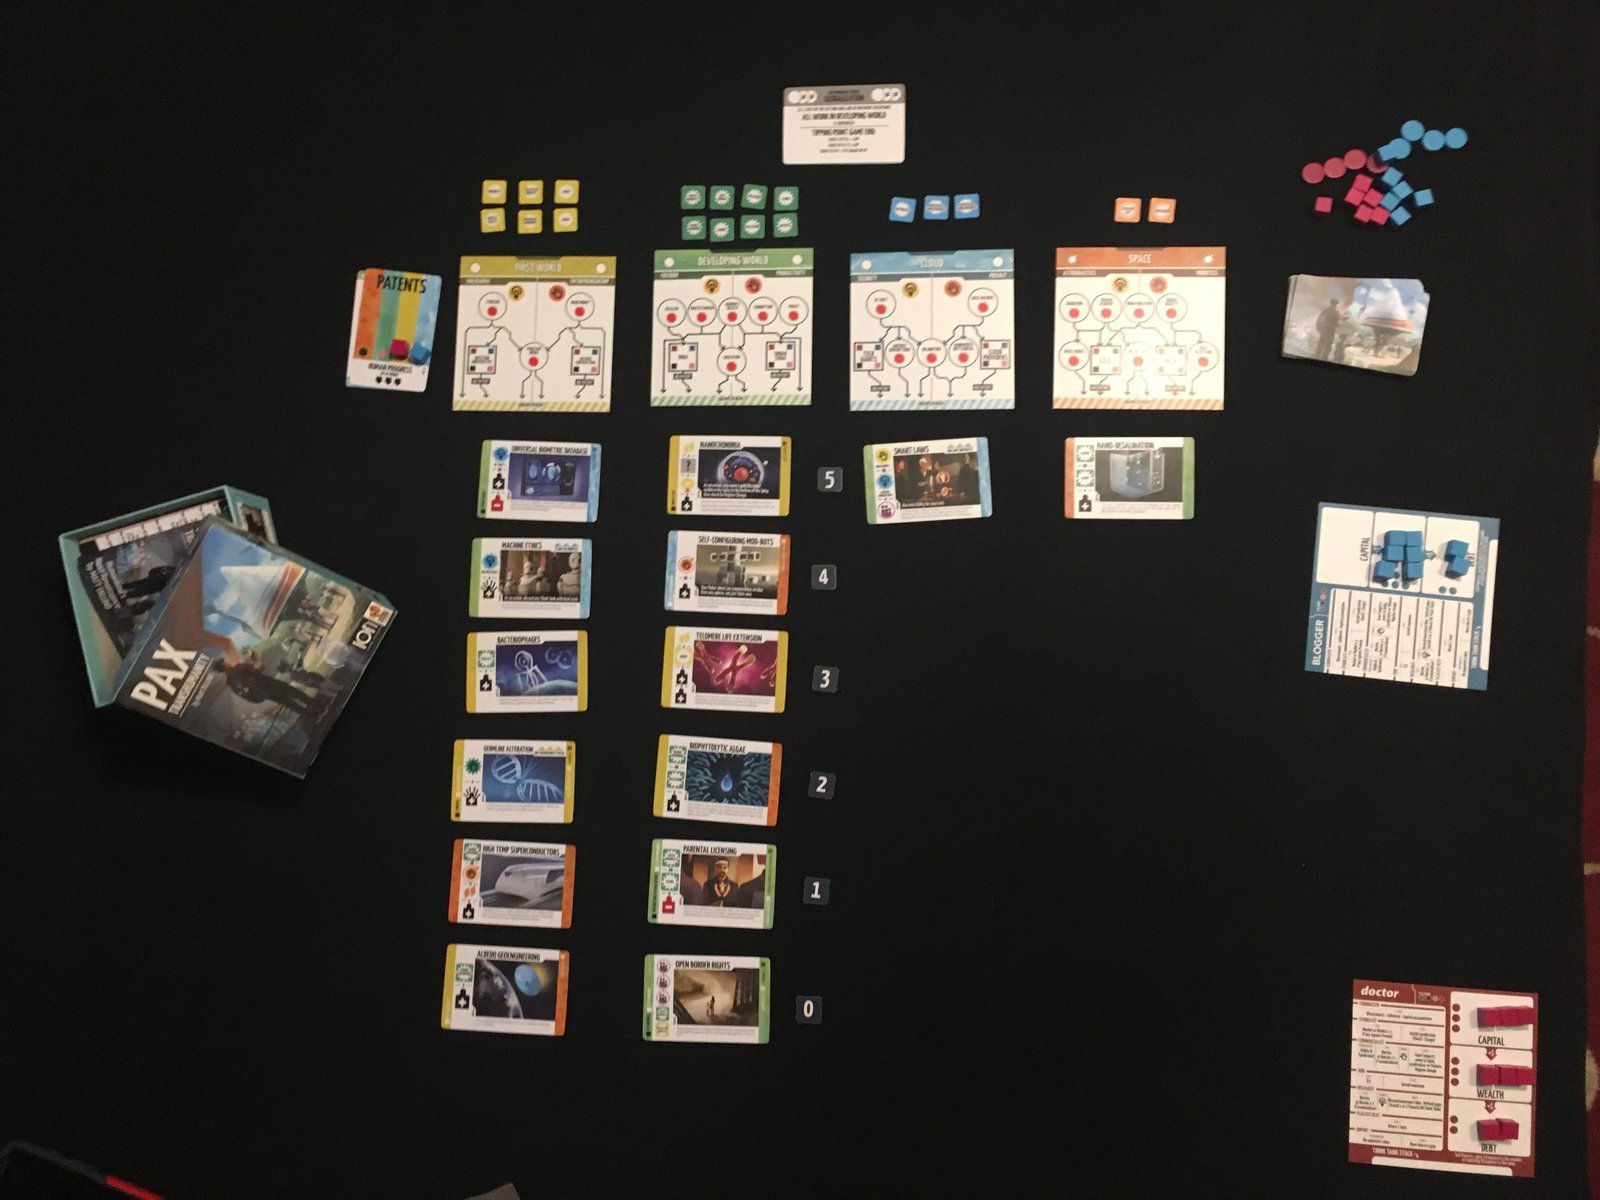 PAX Transhumanity Board Game - Game components displayed in their playing positions. Including, cards, infrastructure placards, and tokens